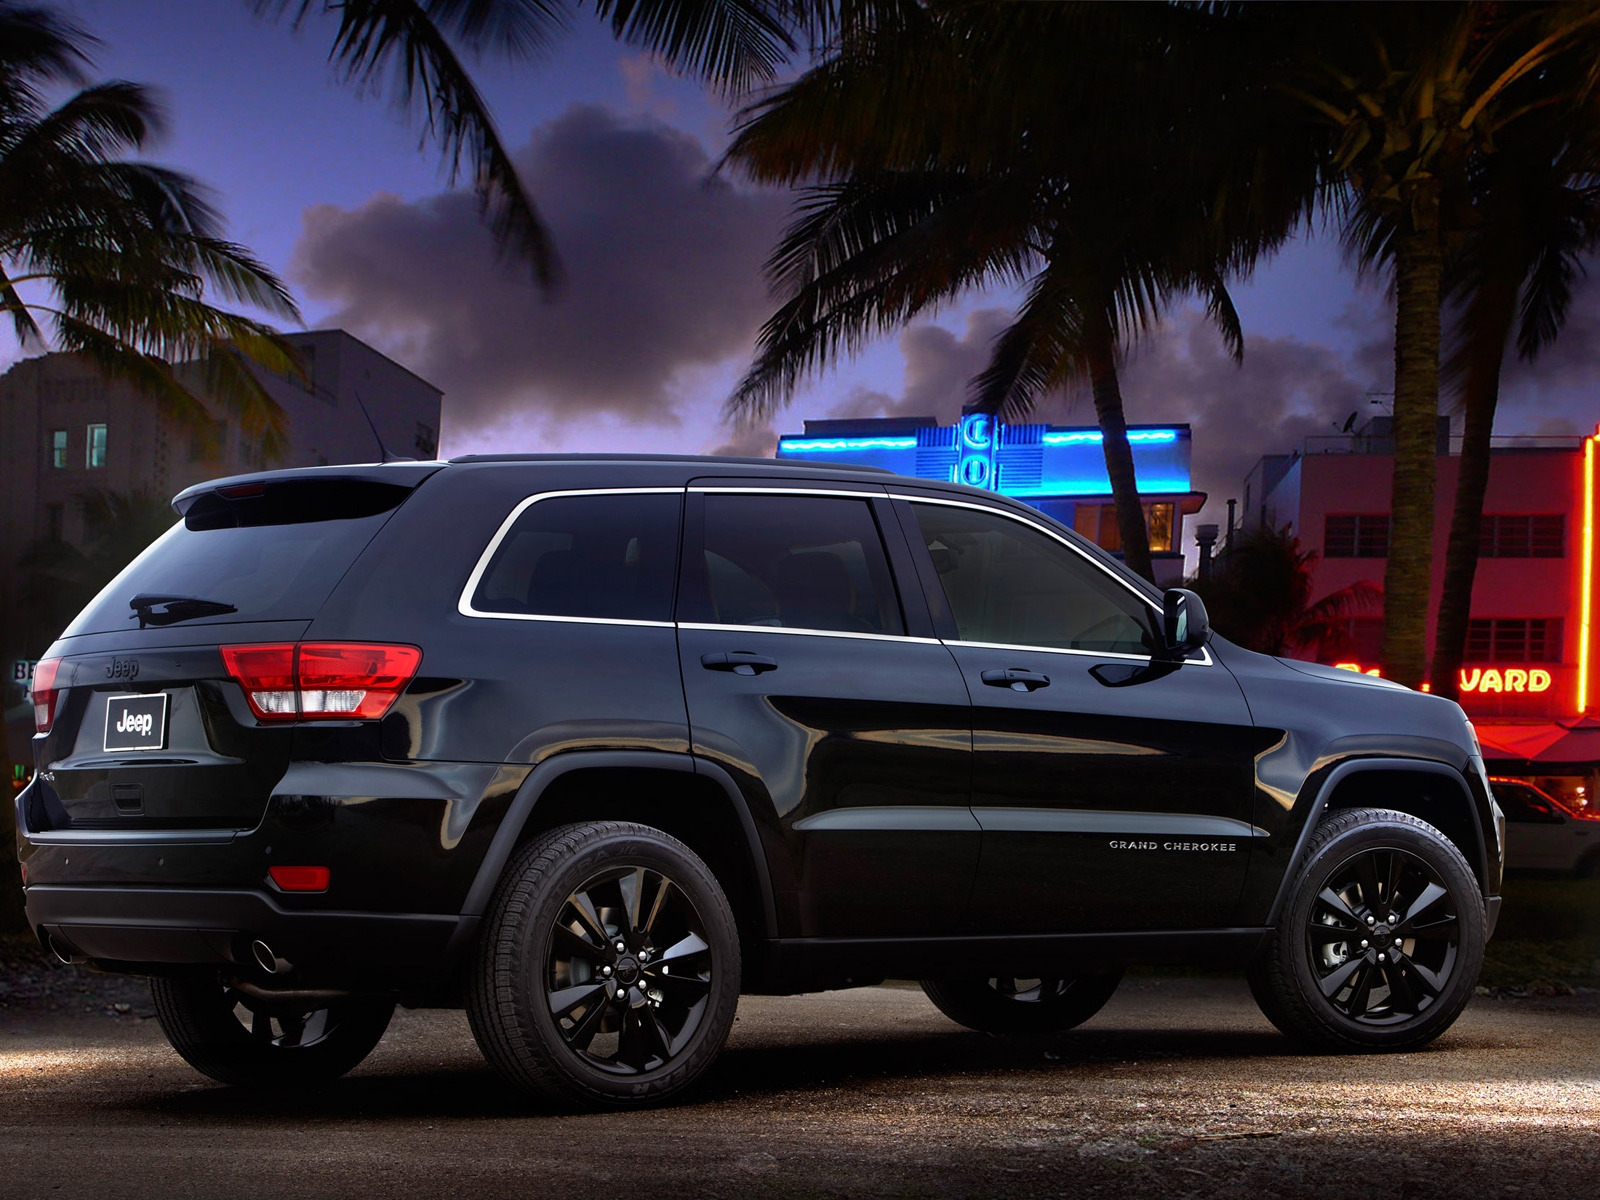 Jeep Grand Cherokee Rear Concept for 1600 x 1200 resolution